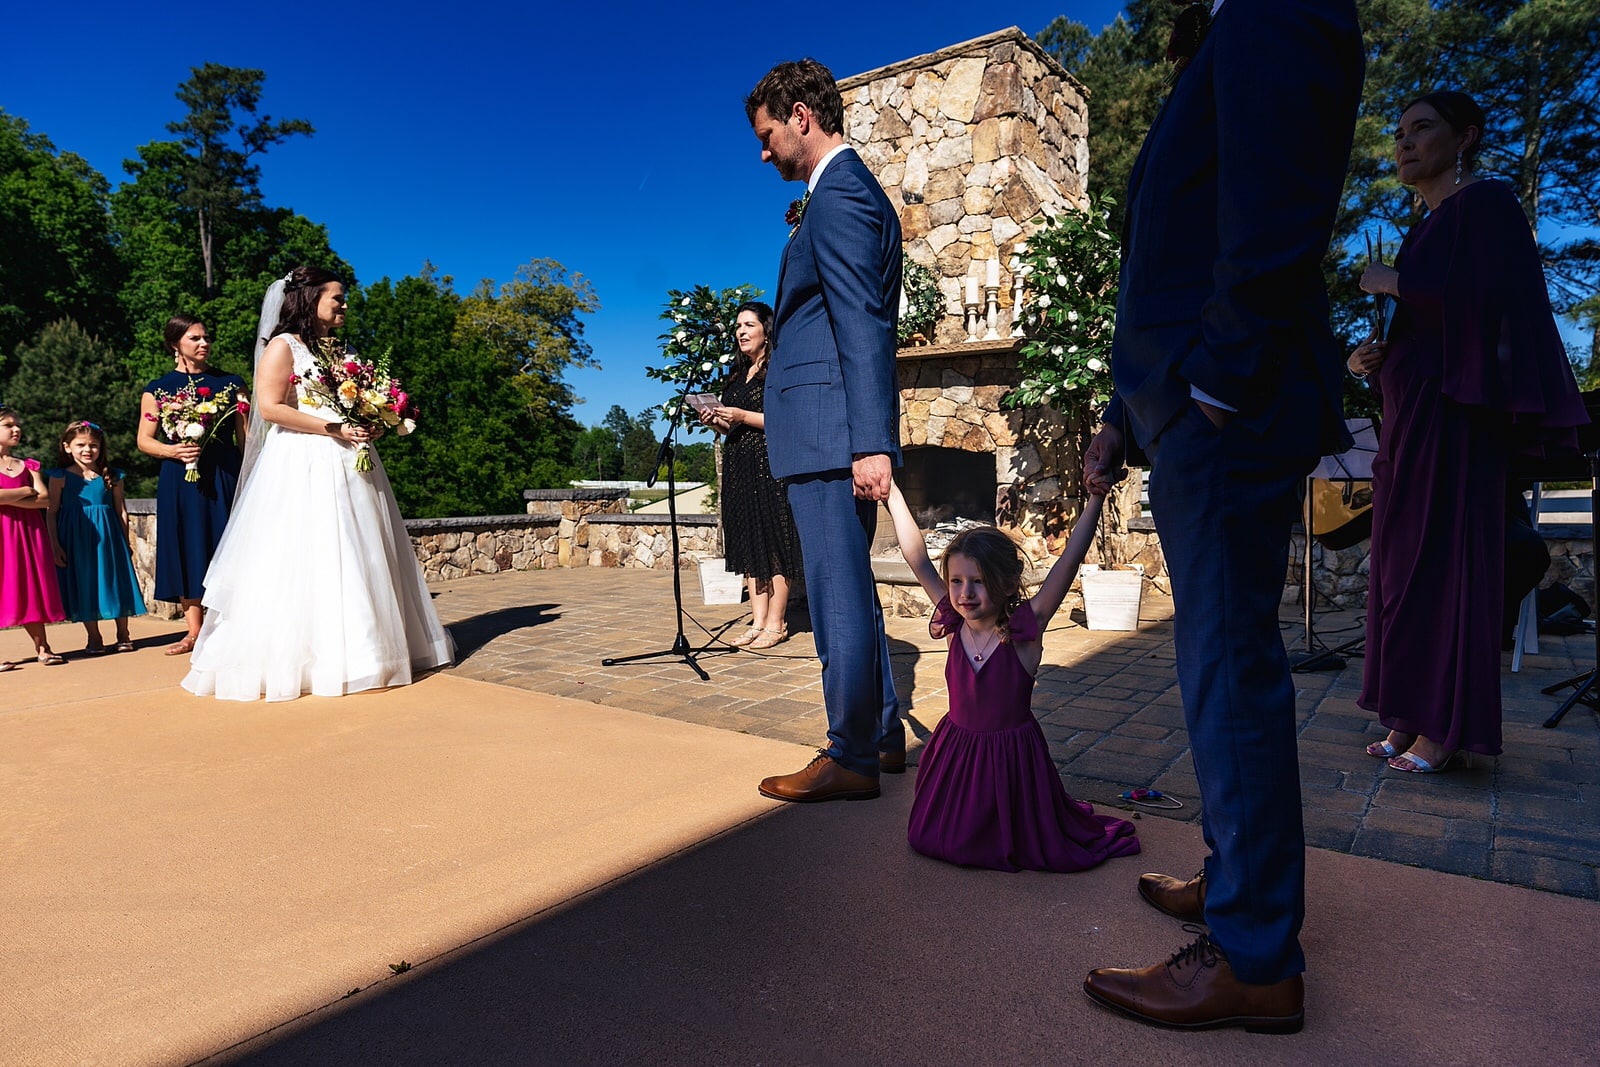 Sweet moments of little kids at weddings